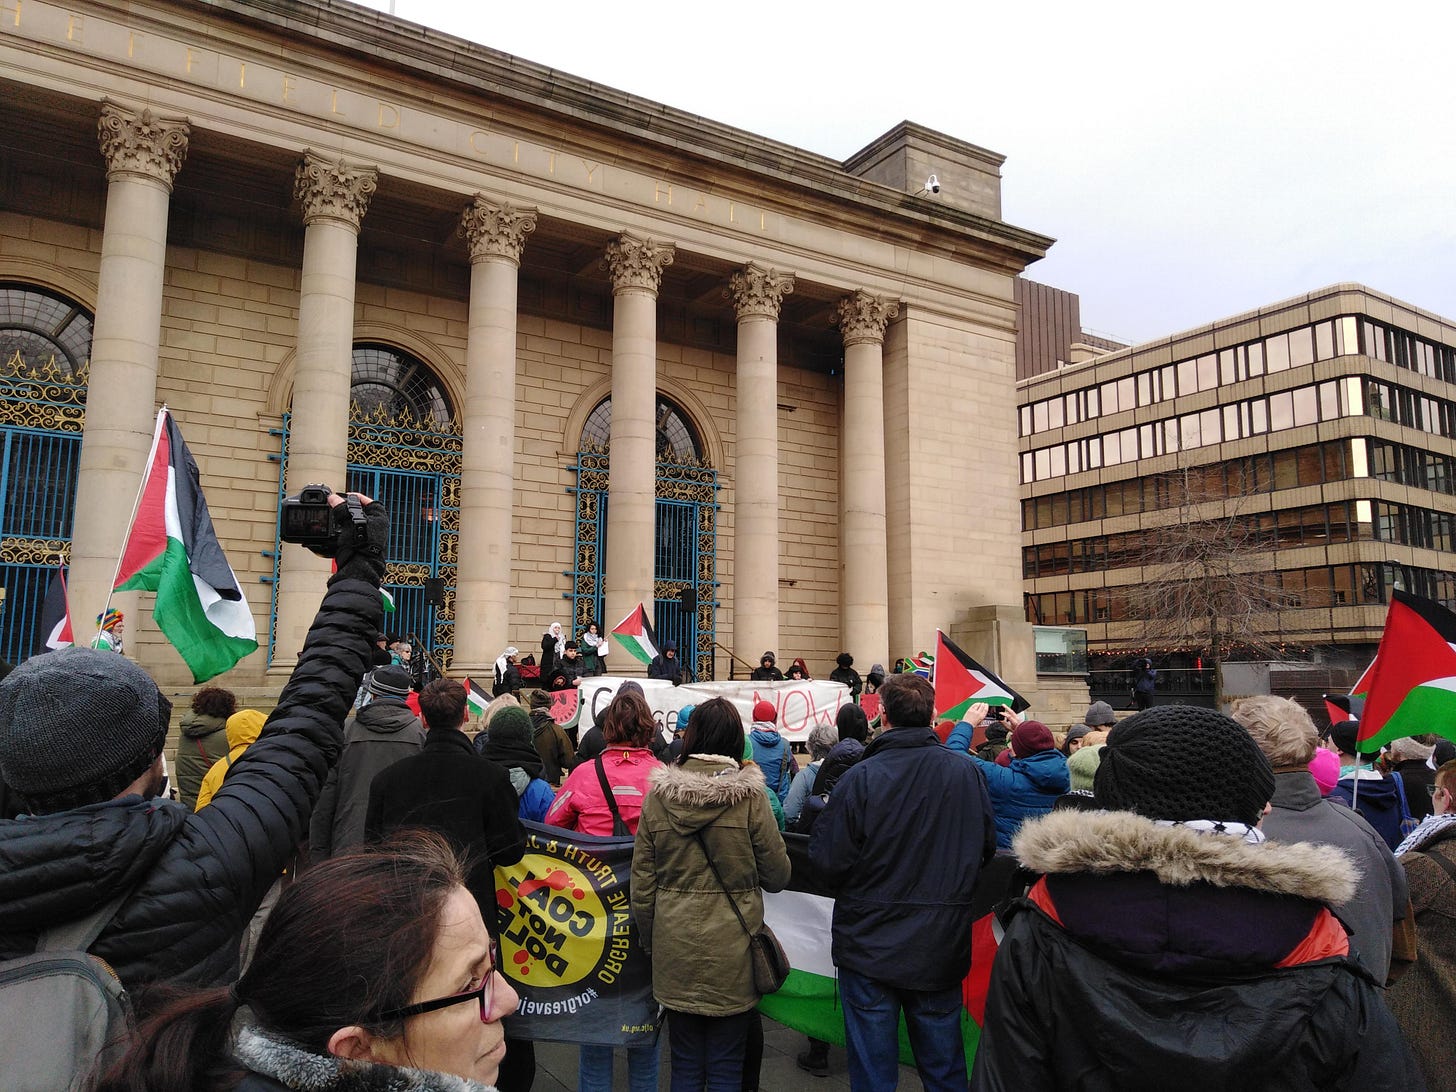 A rally outside Sheffield City Hall. Lots of people holding up red, black, white and green Palestinian flags.